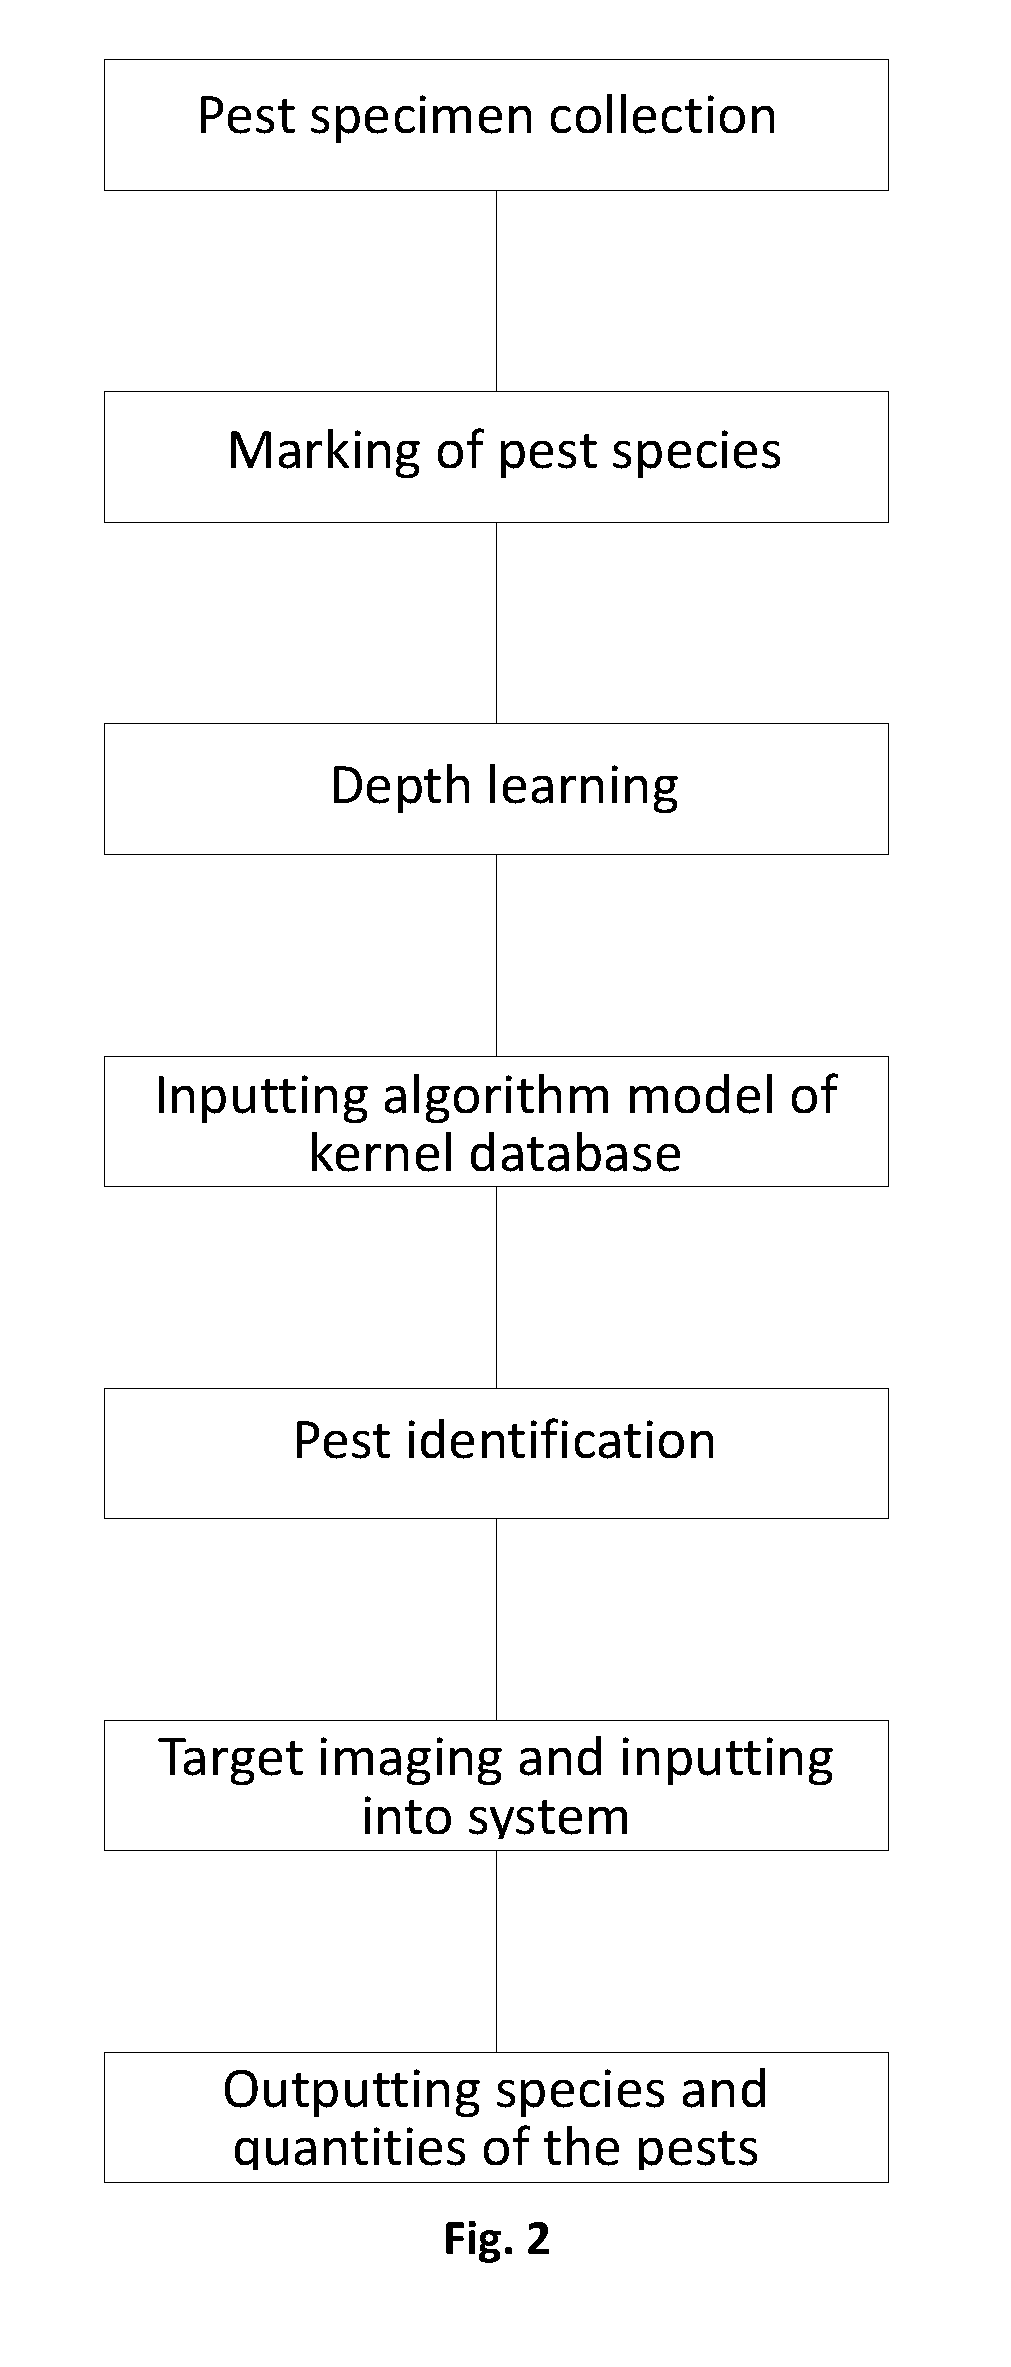 Computer intelligent imaging-based system for automatic pest identification and pest-catching monitoring